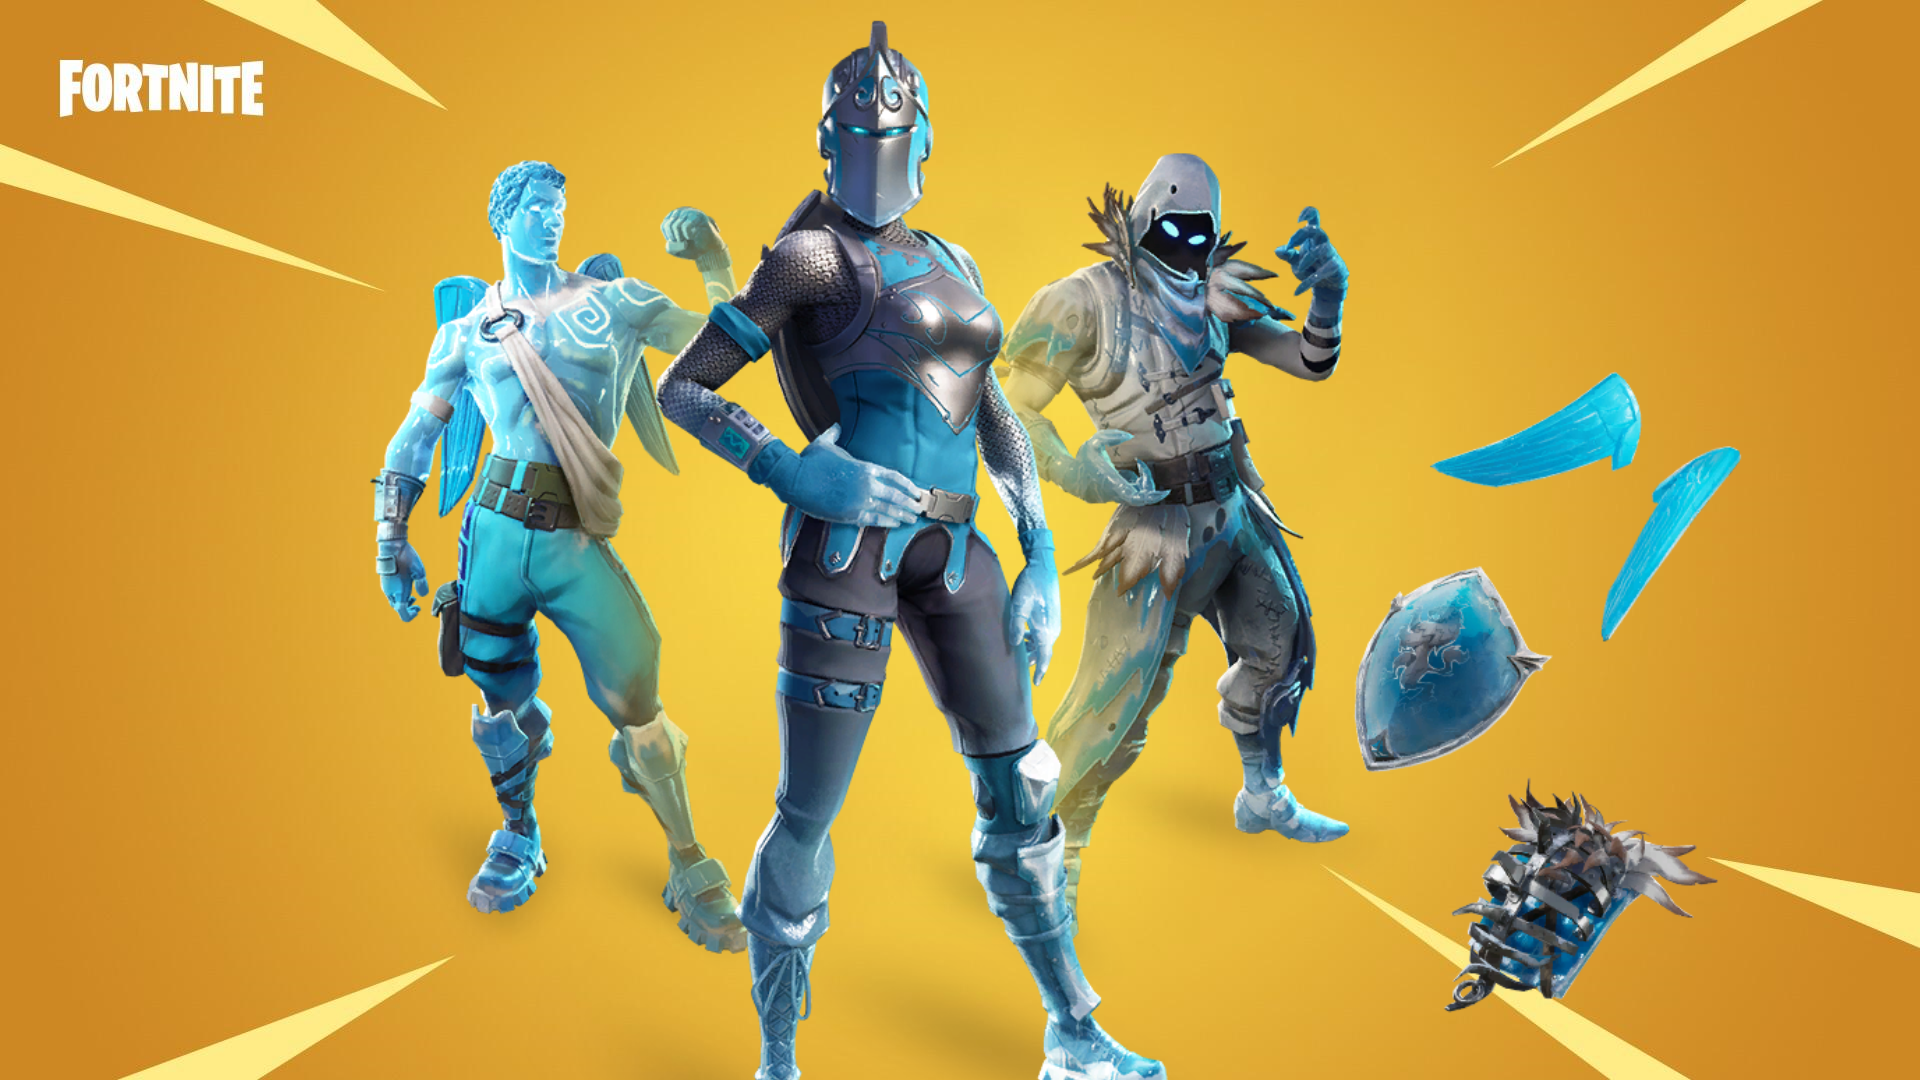 the frozen legends bundle might be on sale for real money only leaks show - fortnite winter royale preise